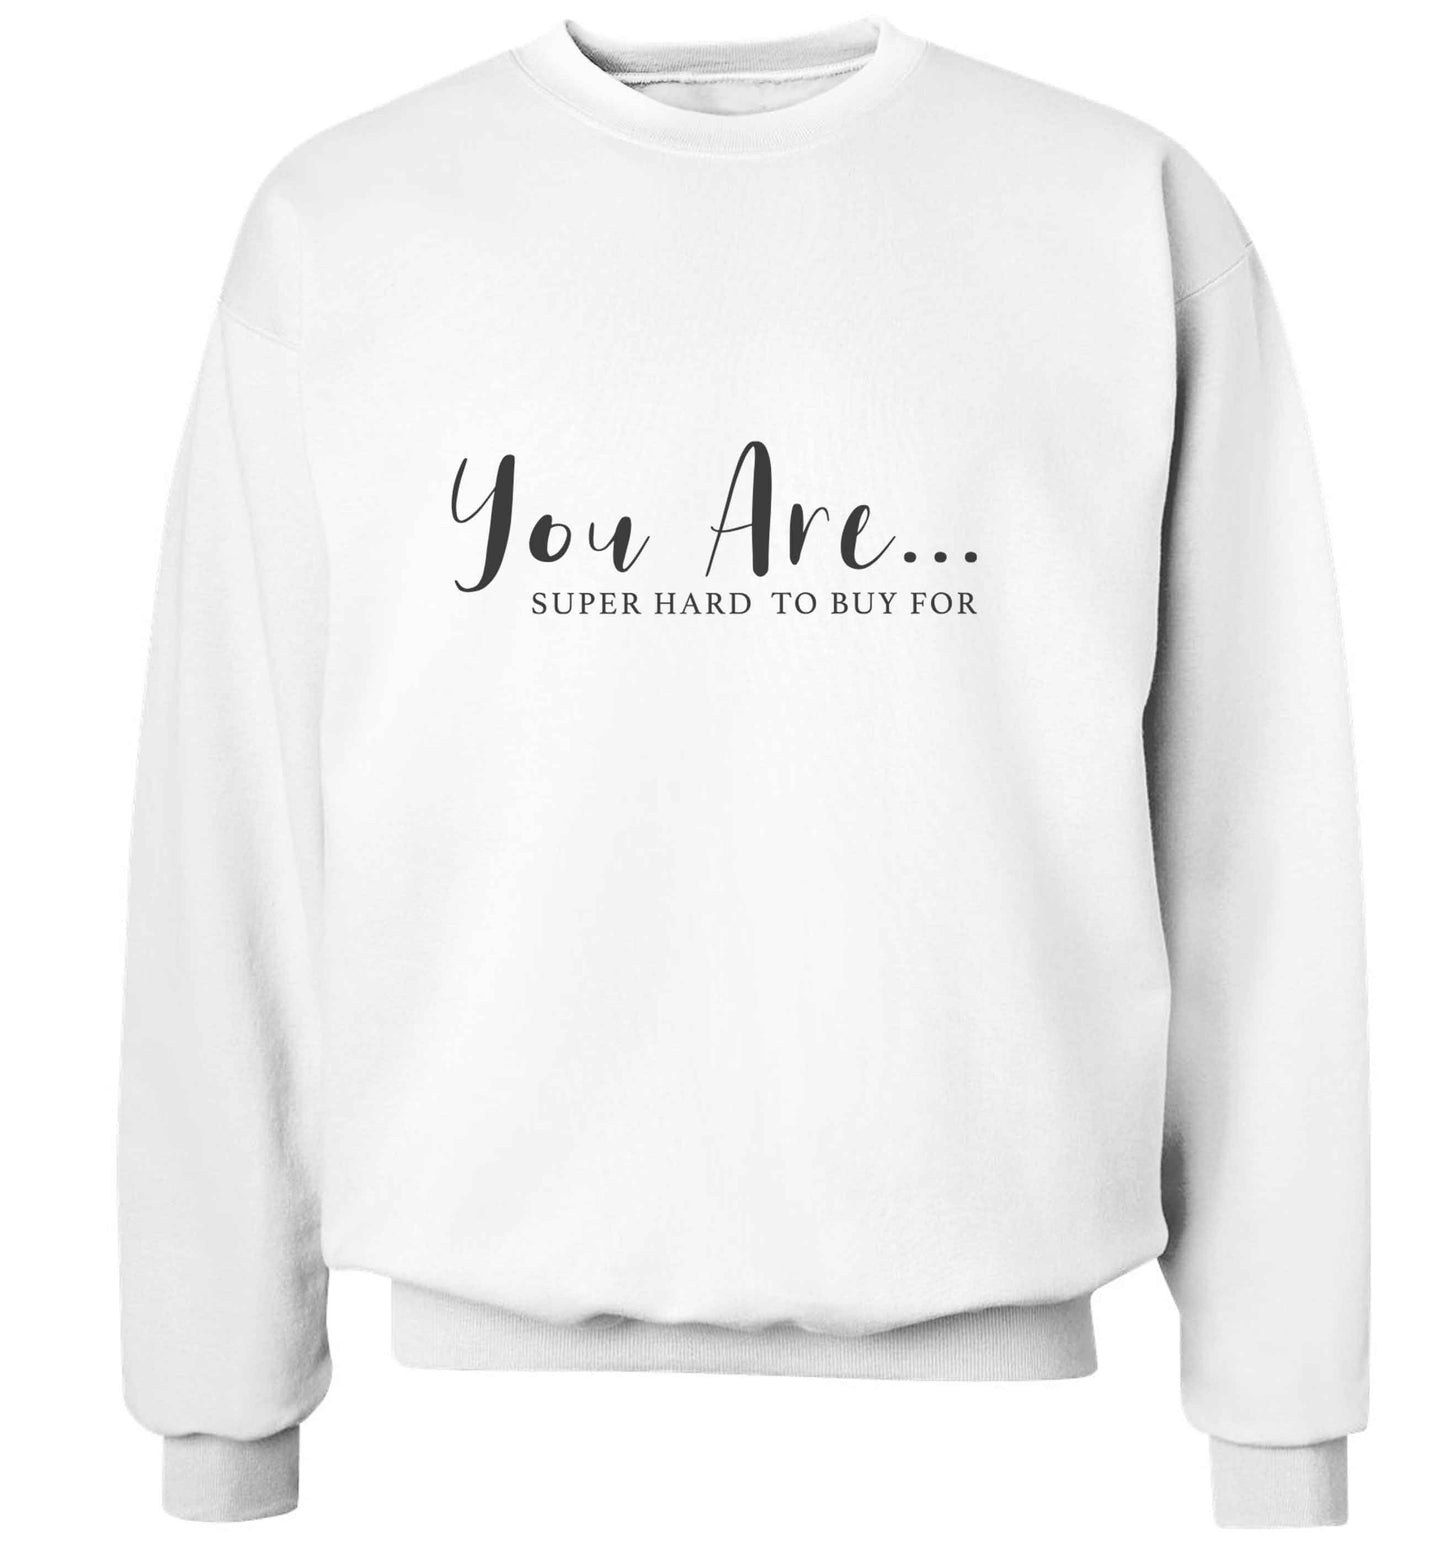 You are super hard to buy for adult's unisex white sweater 2XL